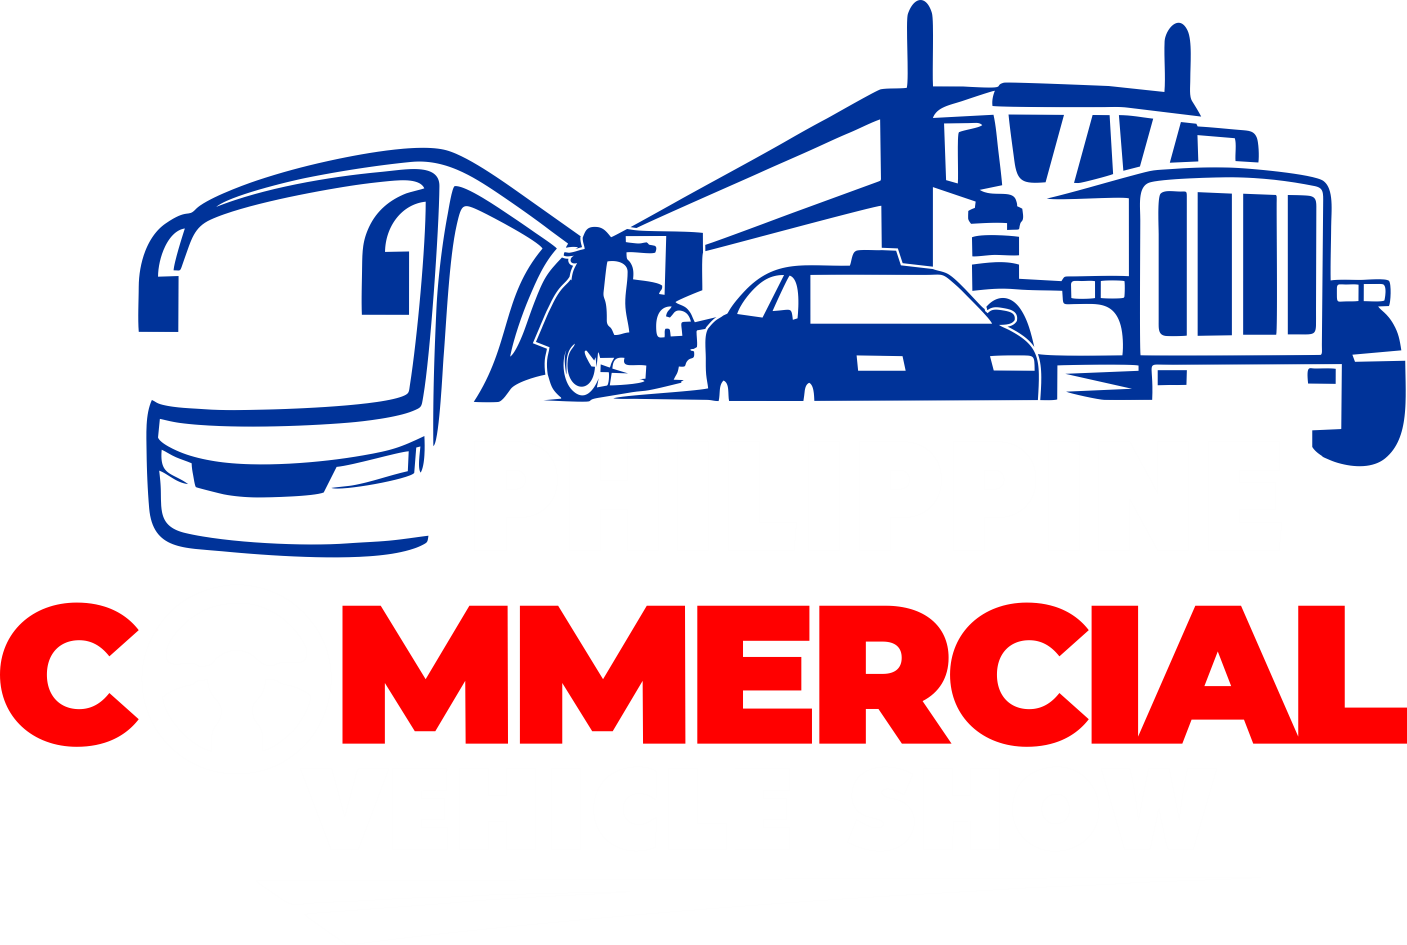 Philippine Commercial Vehicle Show